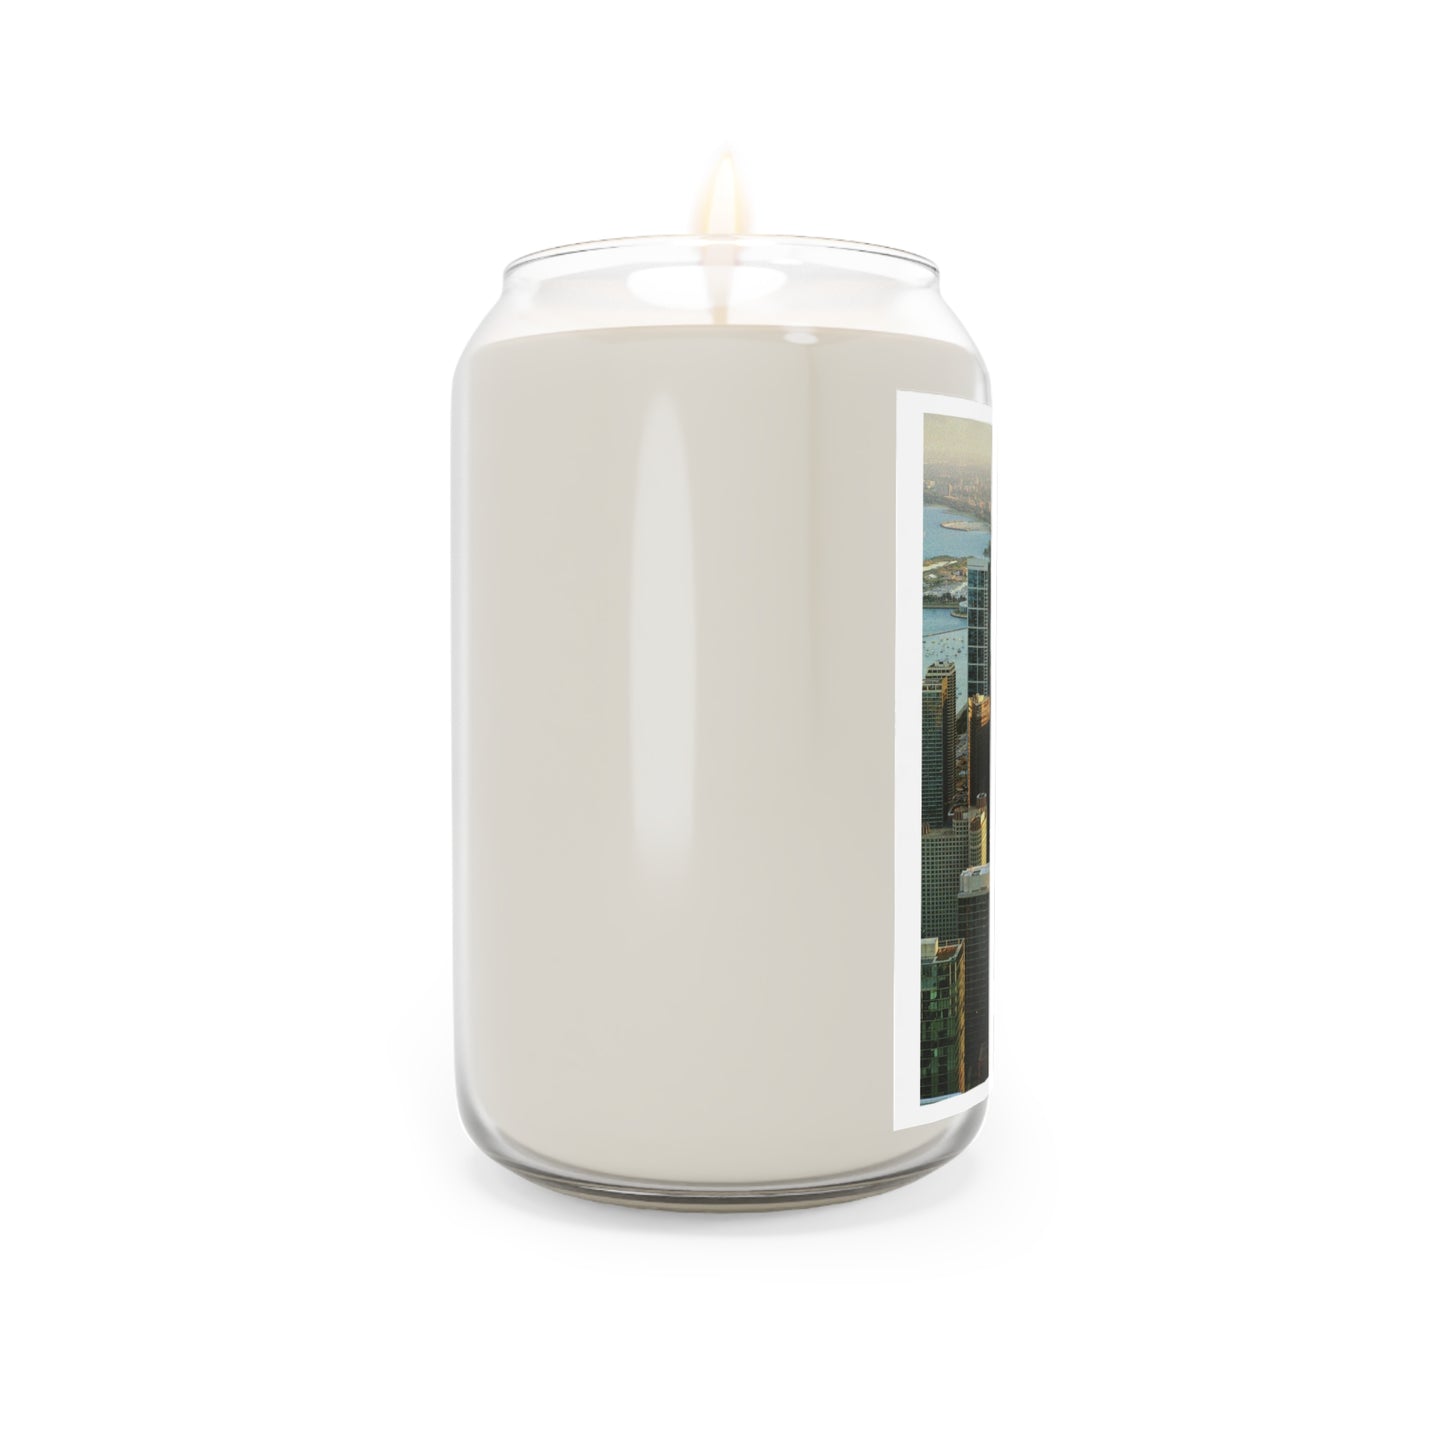 Chicago, Illinois (#020) - Home Town Candles, 13.75oz